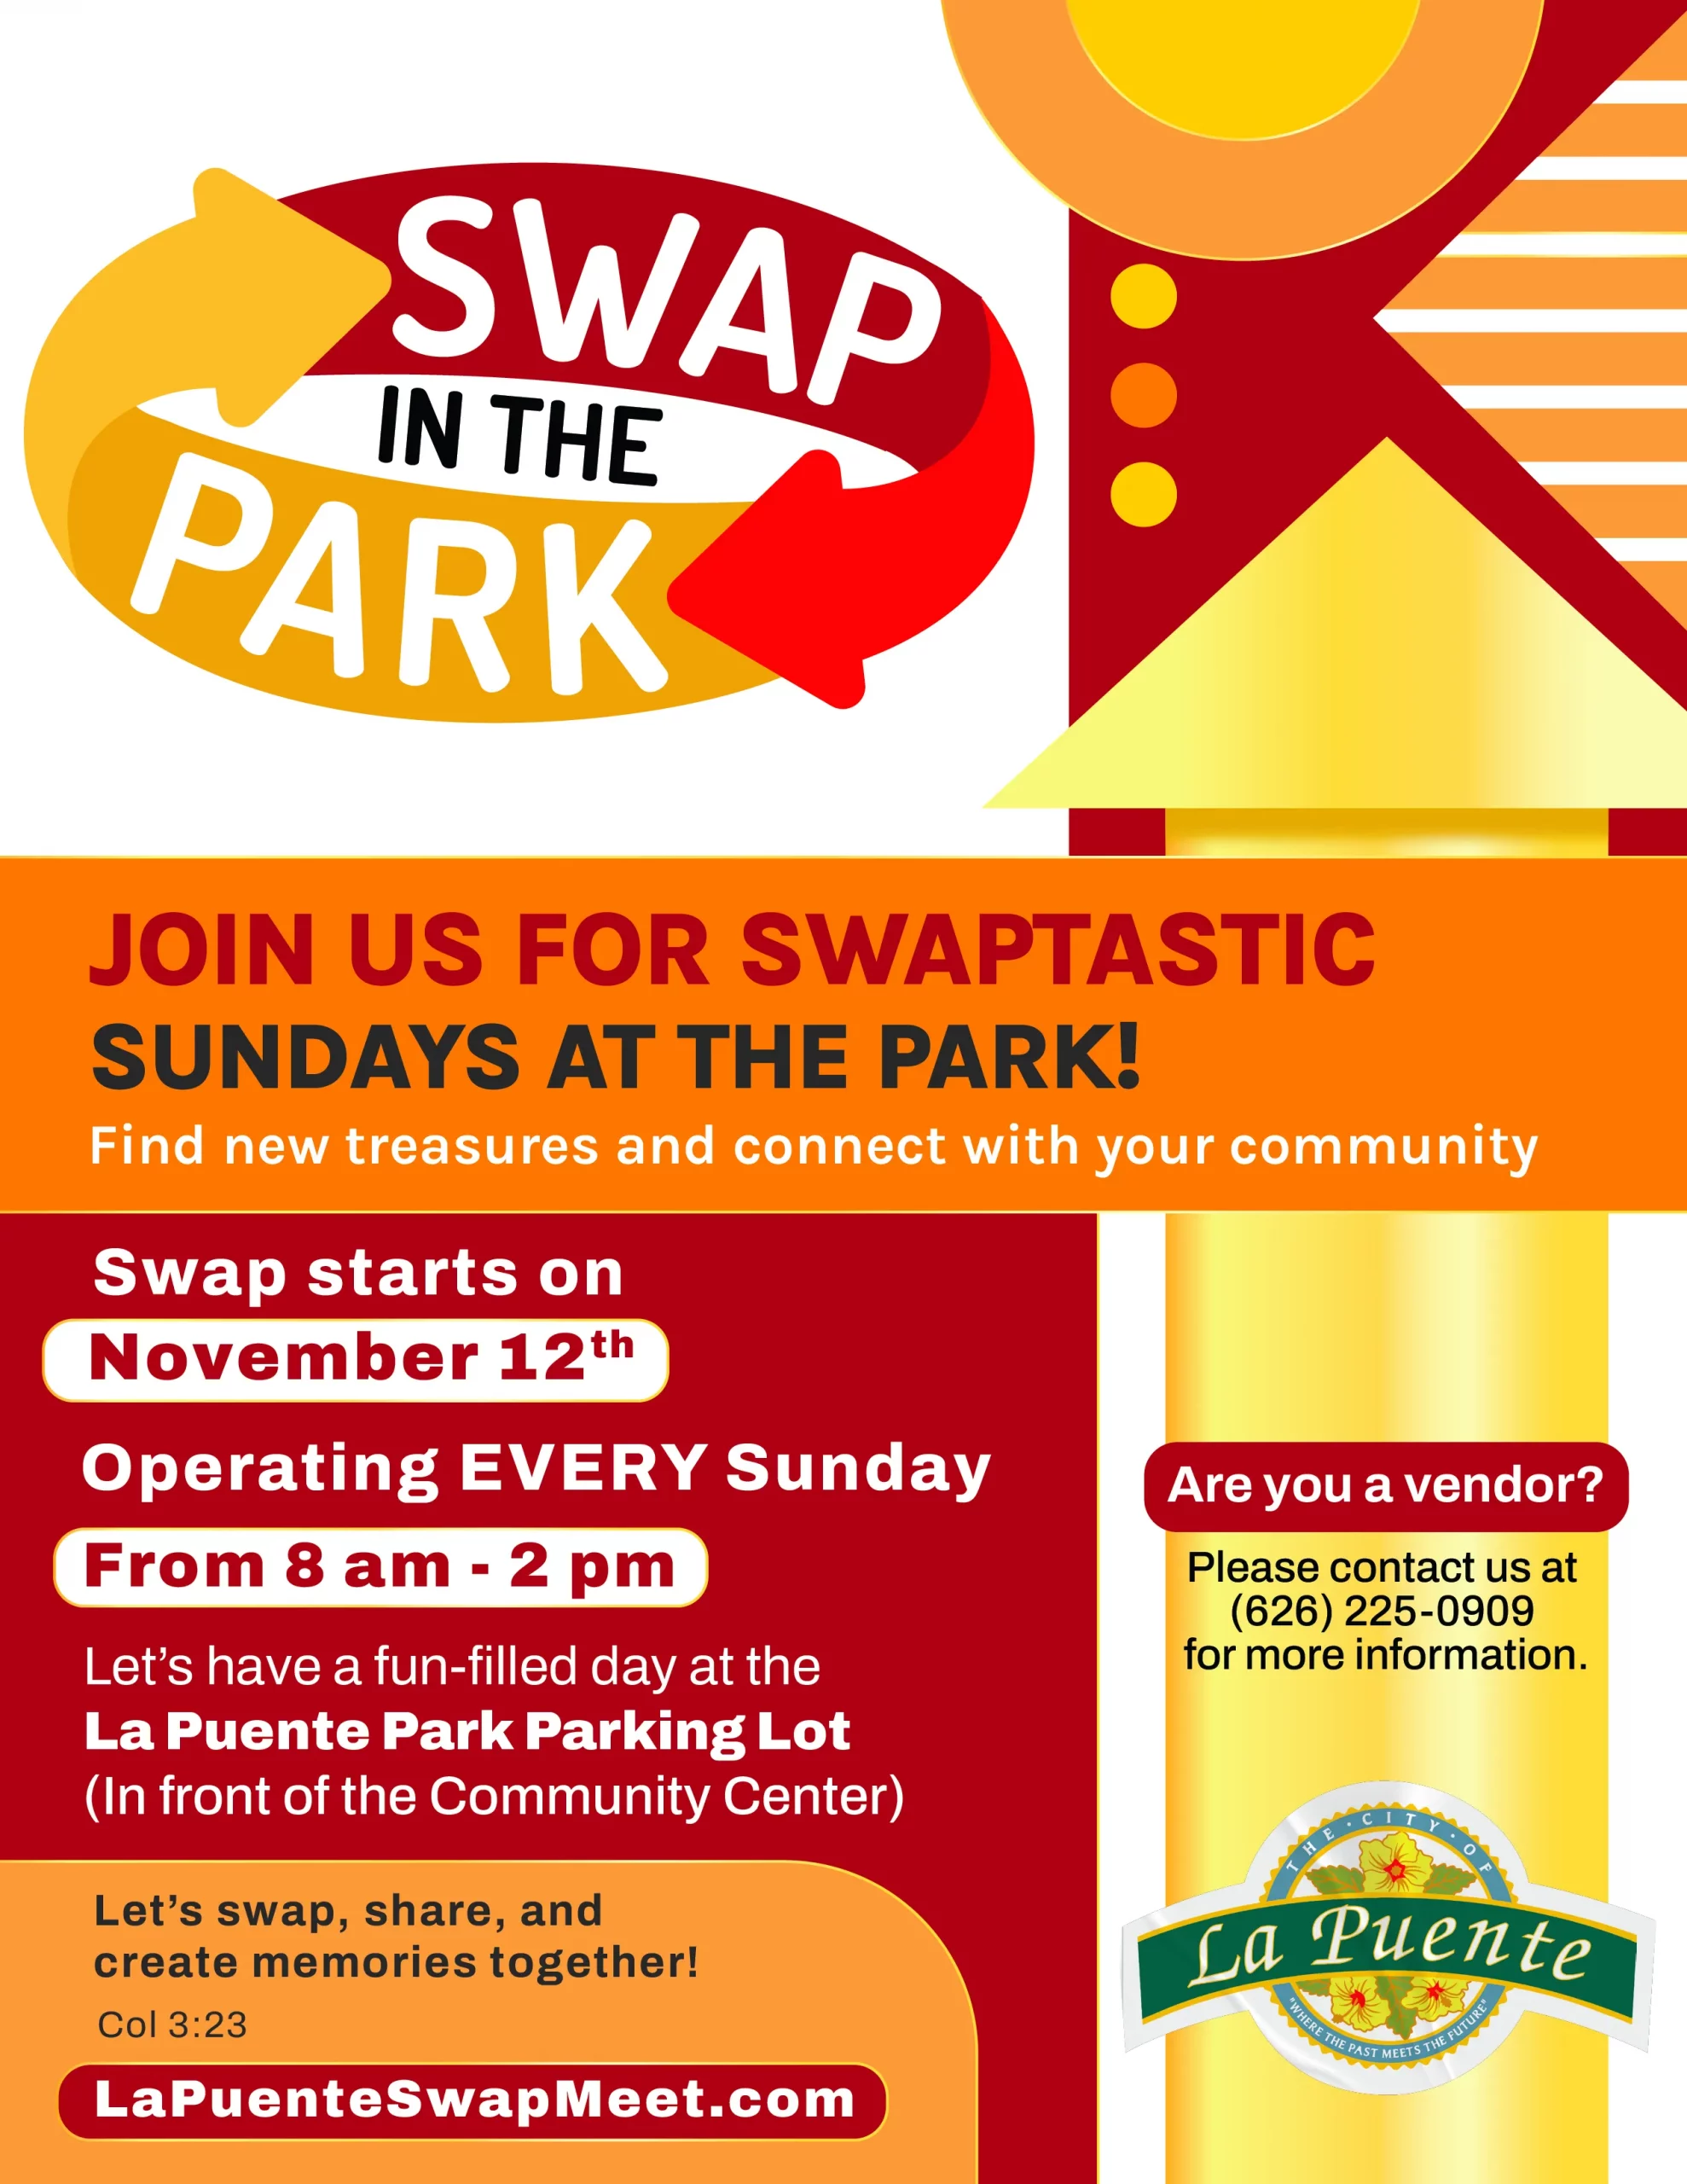 LP_Swap-in-the-Park_Flyer_ENG_02-1